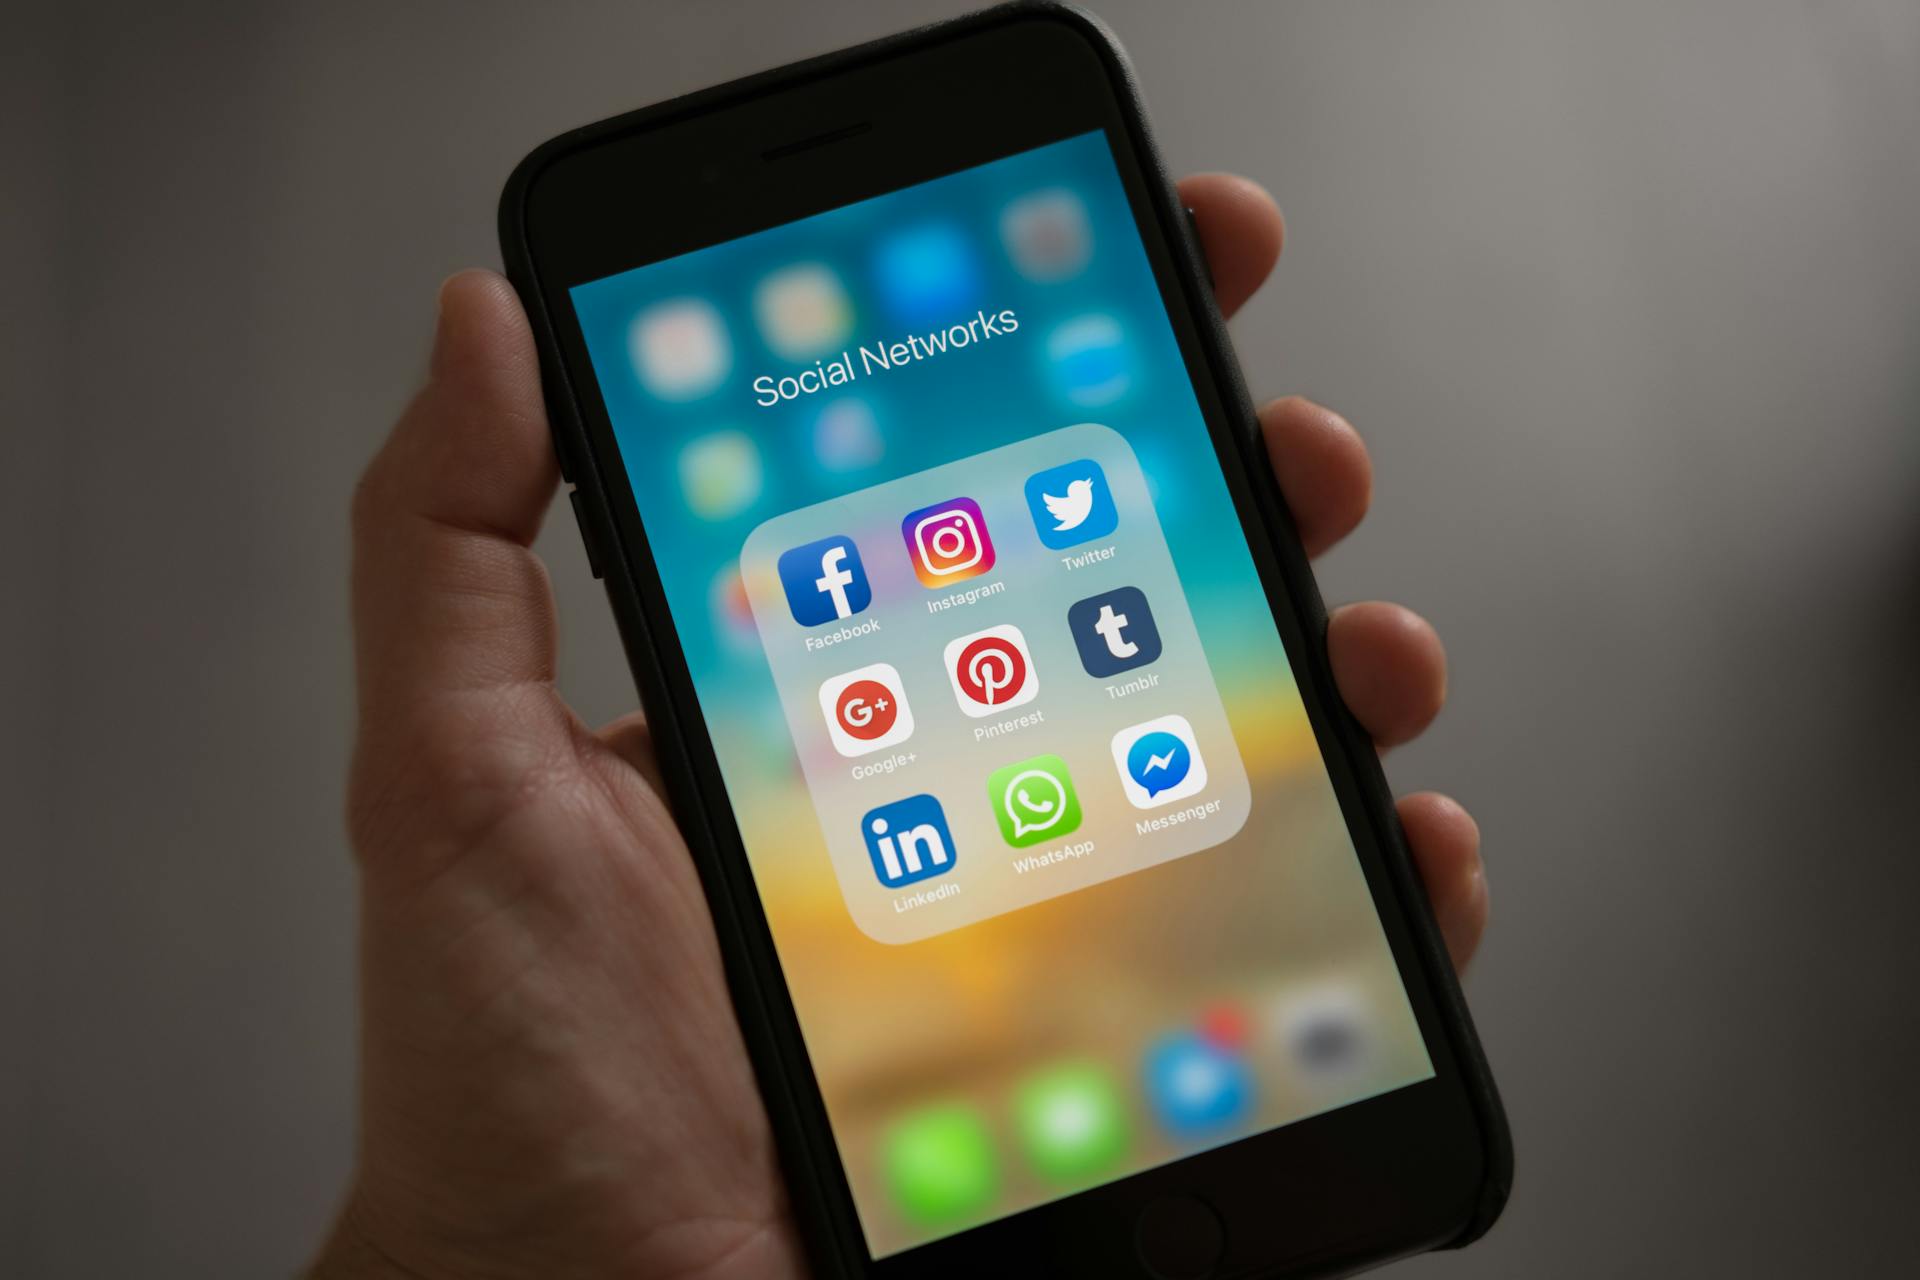 A phone showing social networking apps | Source: Pexels